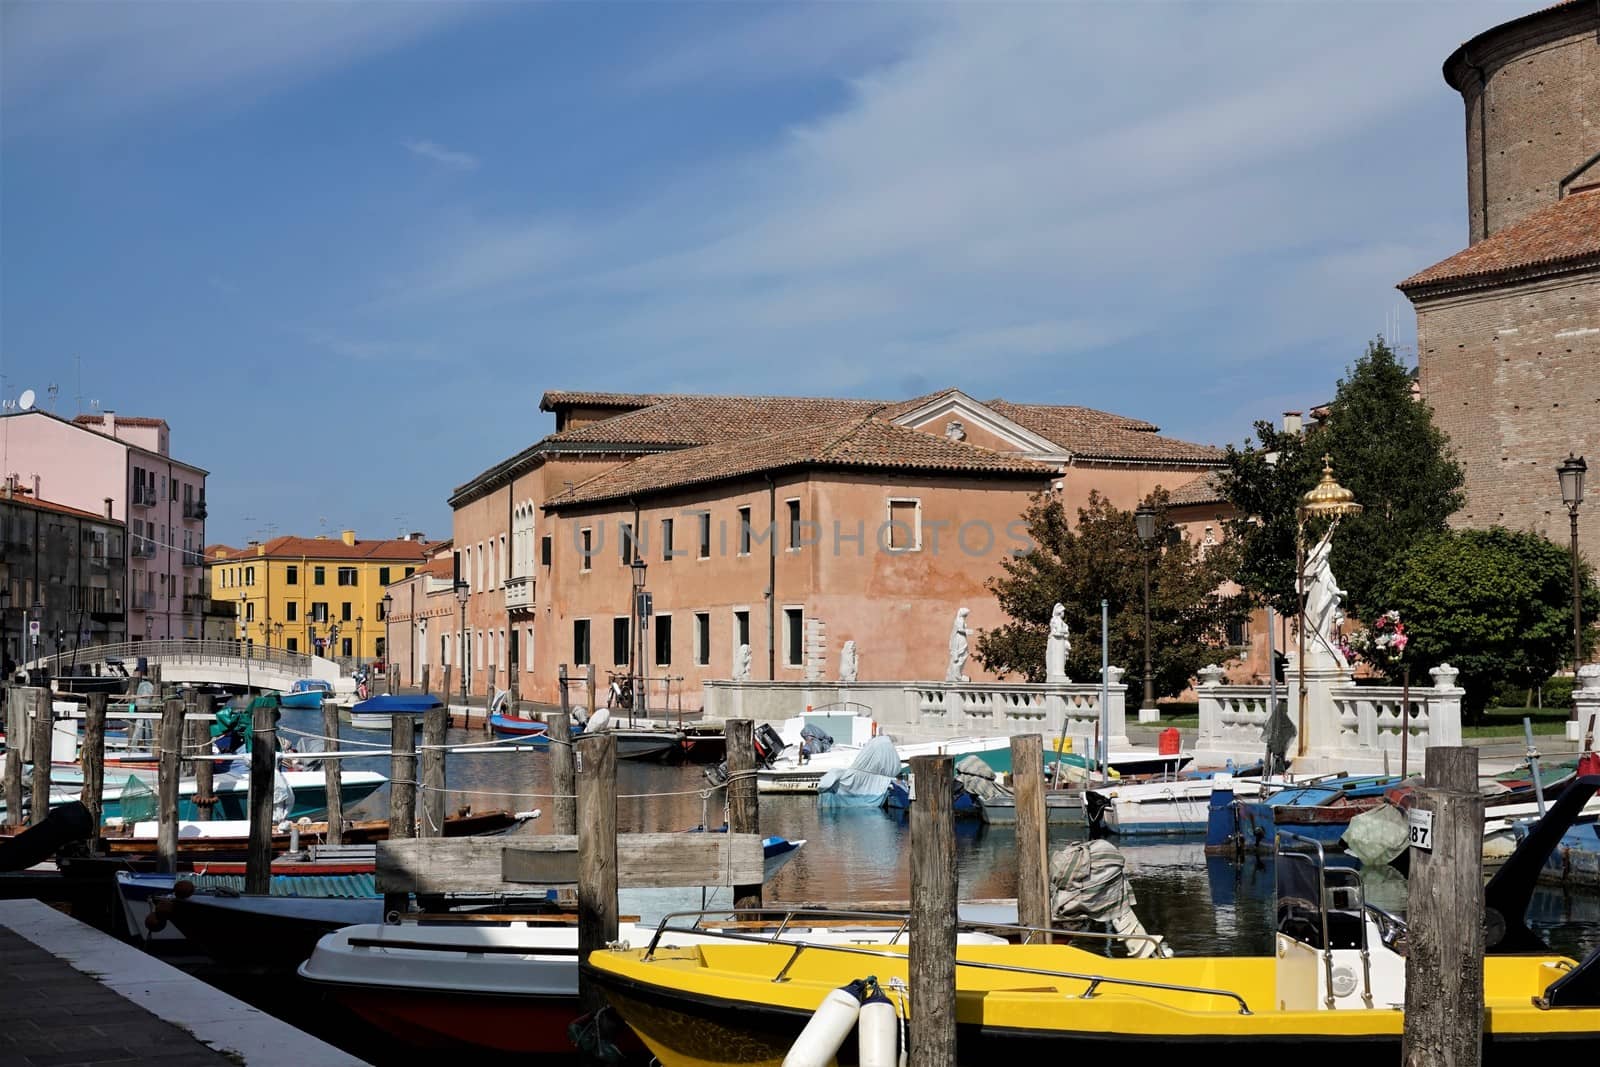 Small harbour in the city of Chioggia, Italy